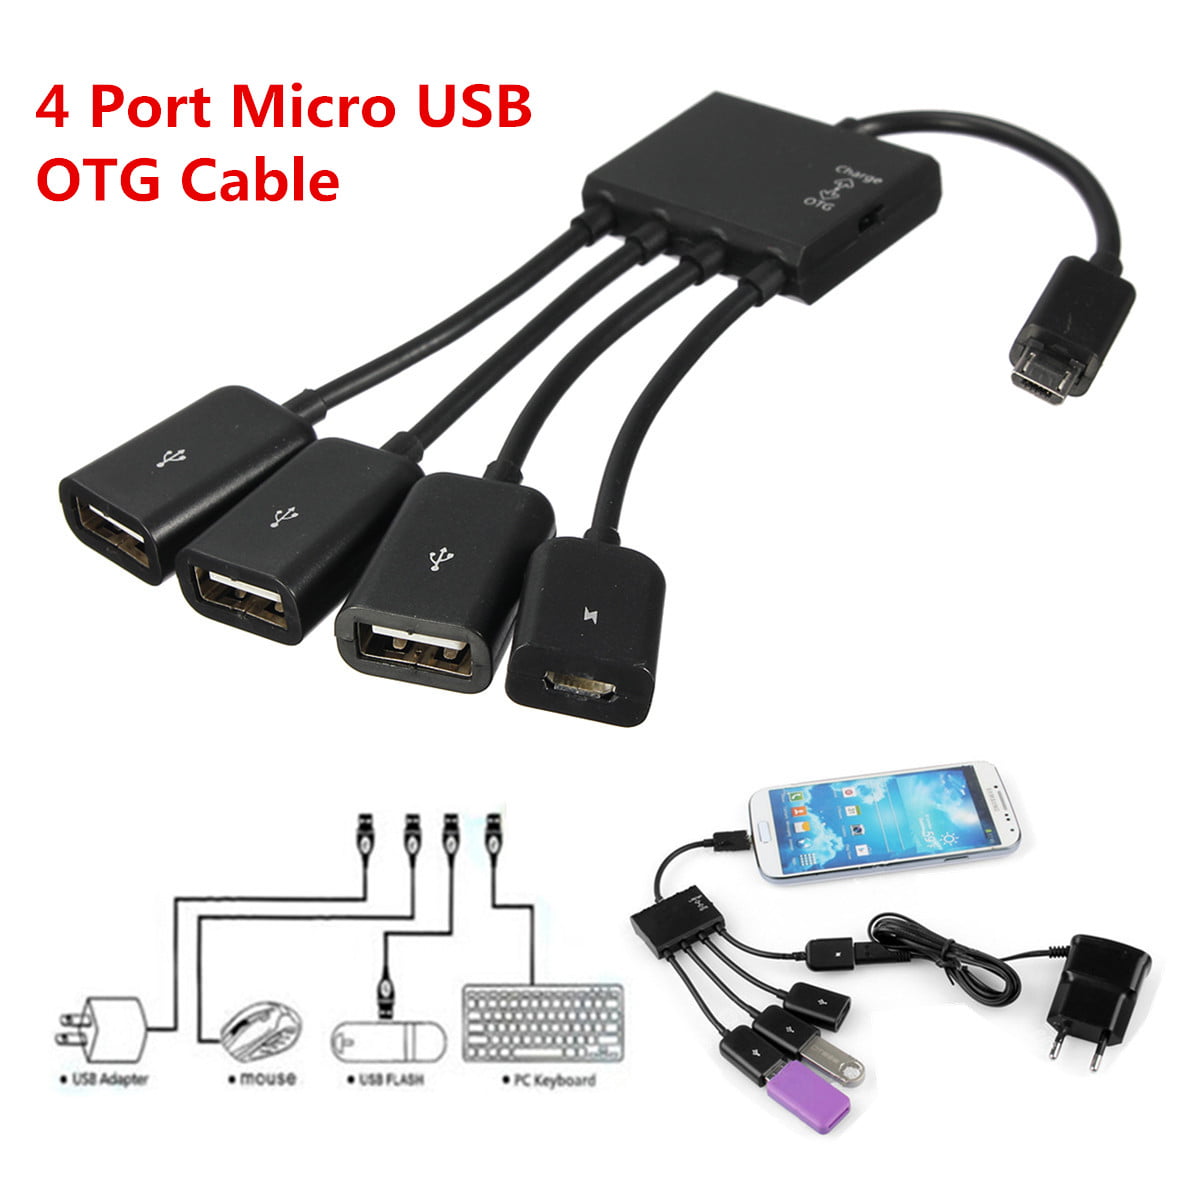 PRO OTG Power Cable Works for Alcatel 871A with Power Connect to Any Compatible USB Accessory with MicroUSB